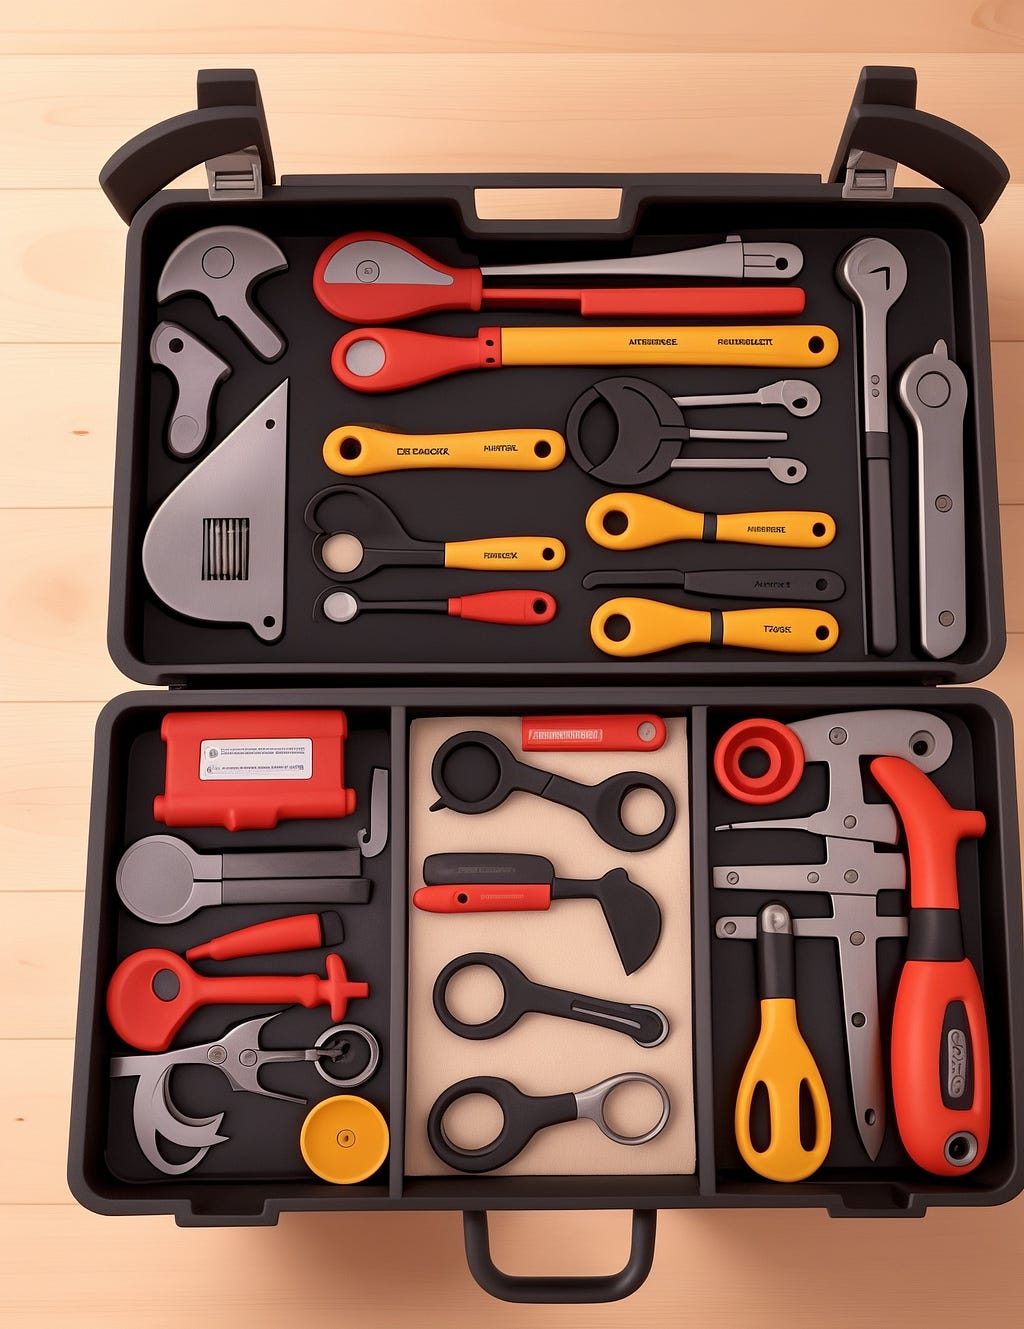 Create an image of a toolbox filled with various tools, each tool representing a resource mentioned in the article (GitHub, AppExchange, plugins). Consider adding labels to identify each tool.